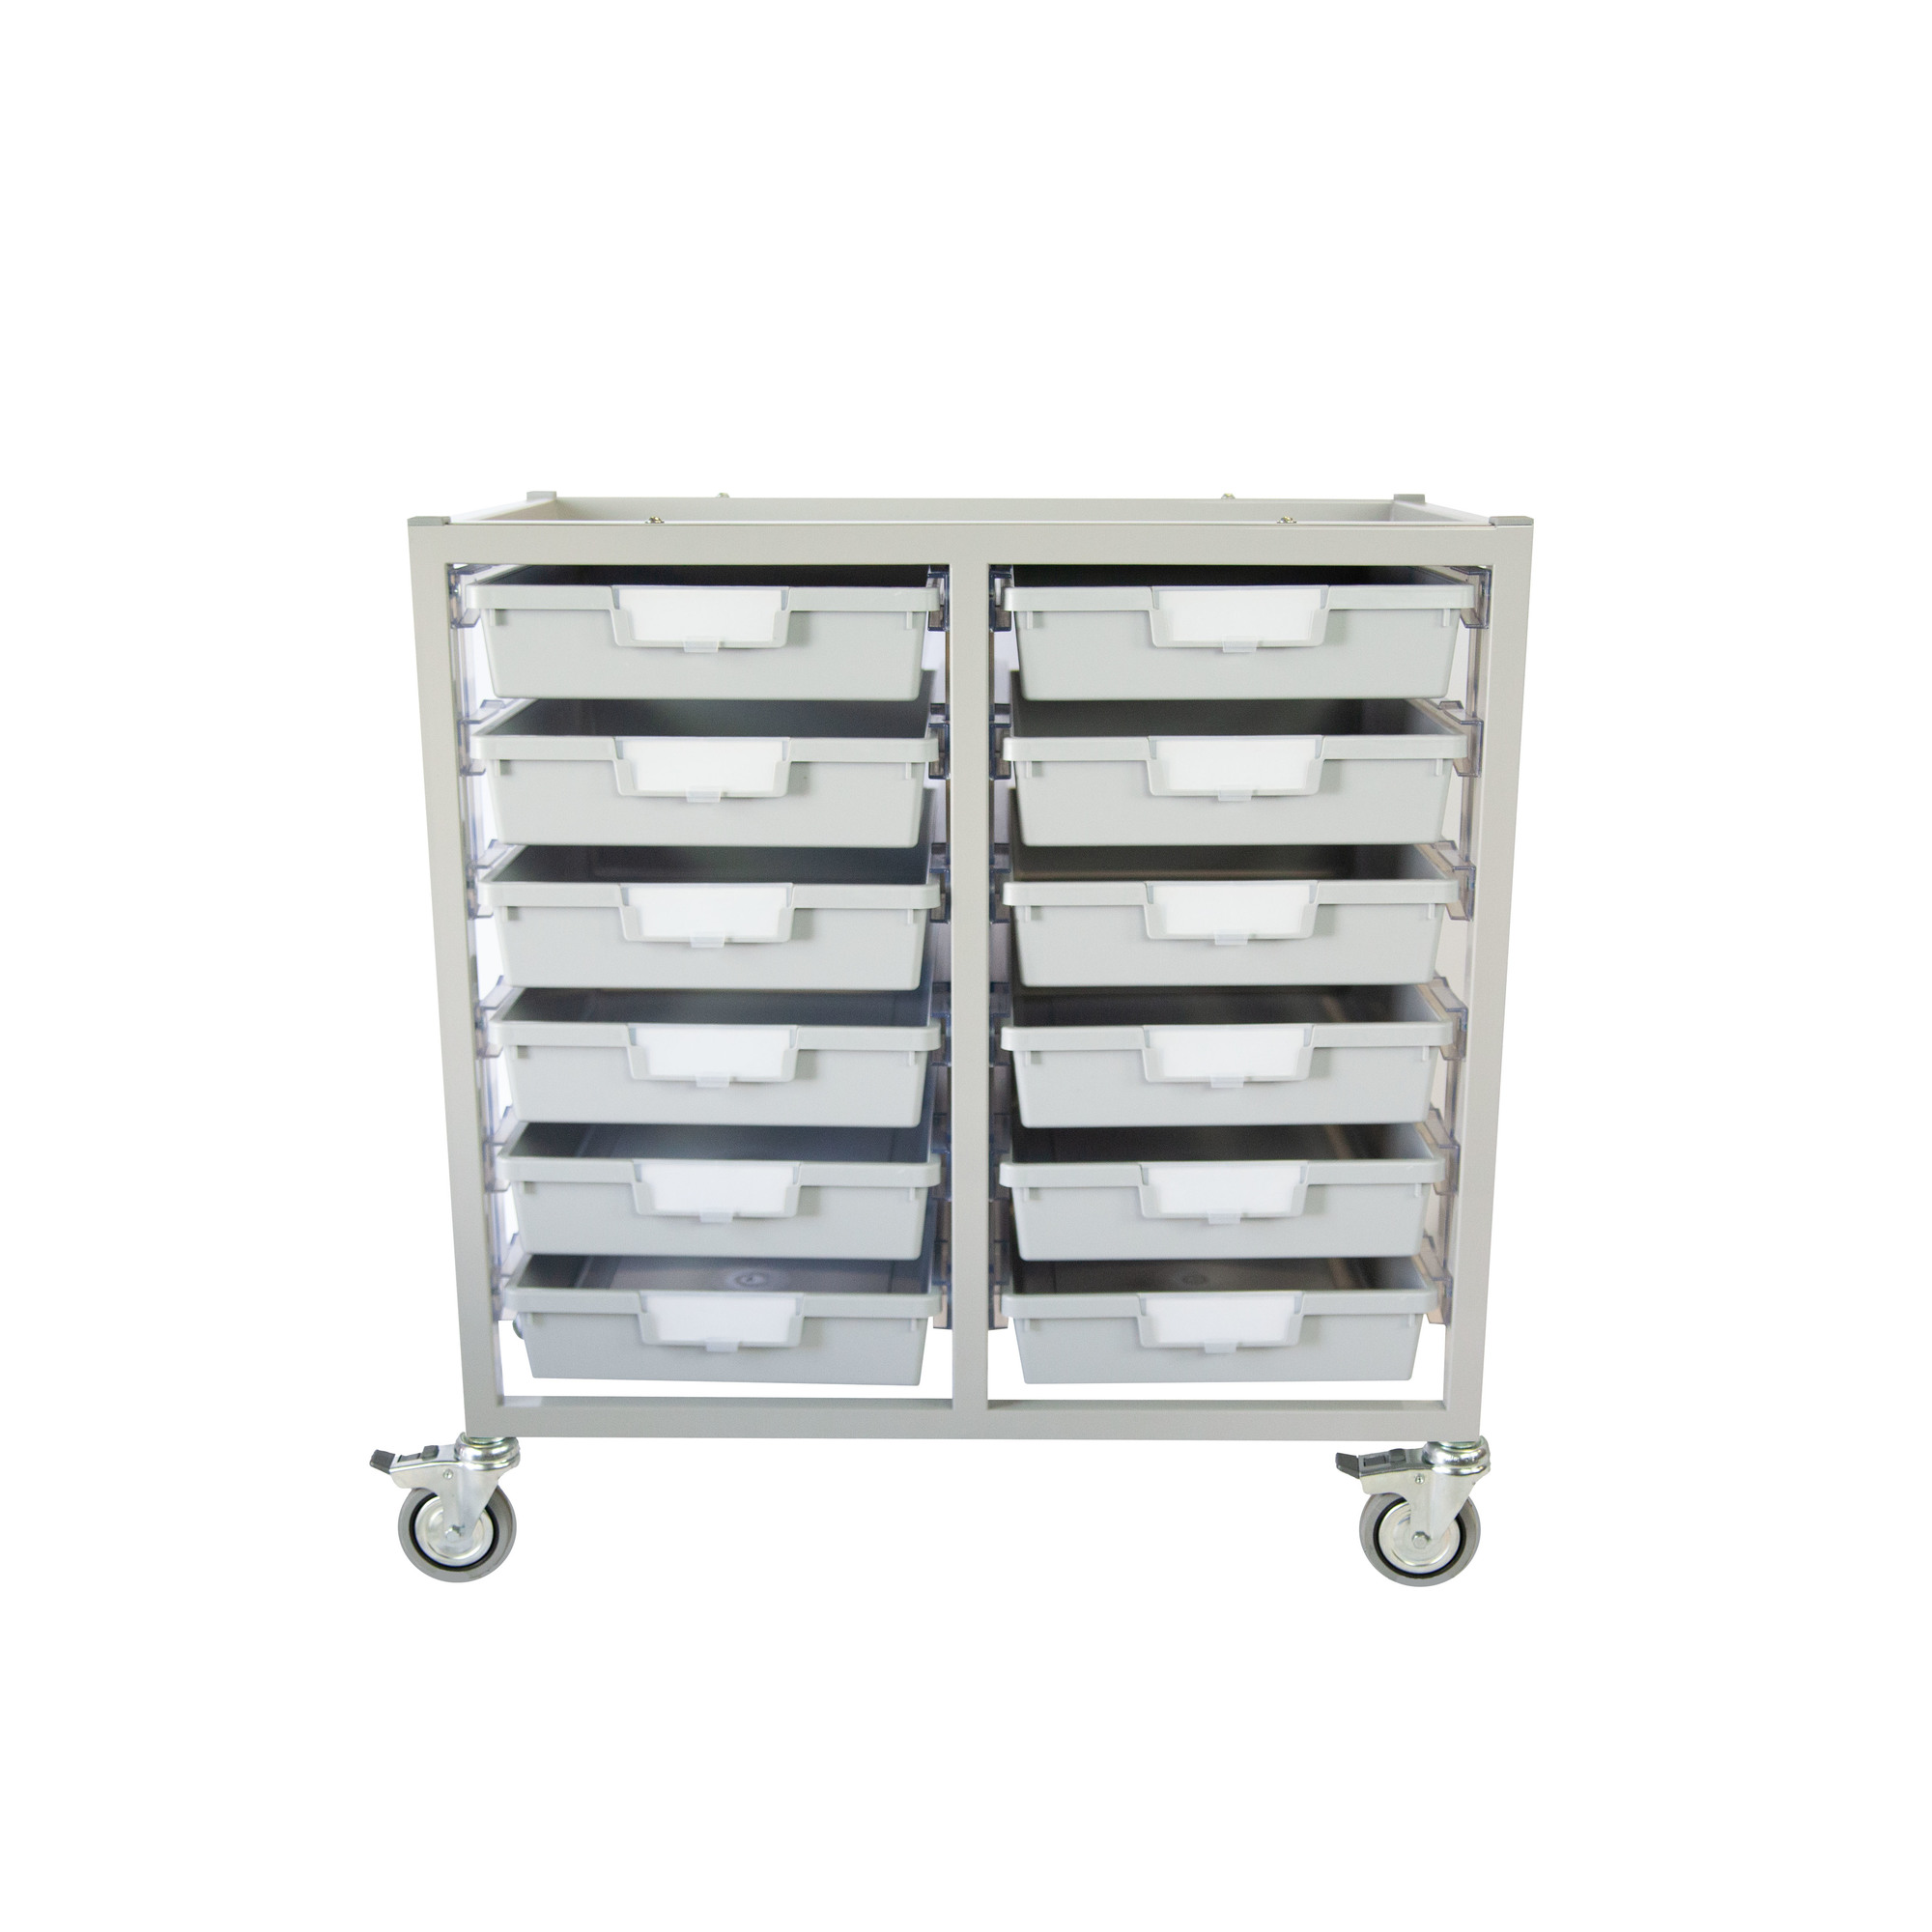 Certwood, Swift Cart Slim-Gray with 12 Gray Trays, Included (qty.) 1, Material Steel, Height 29.5 in, Model CE2101LG-12SLG